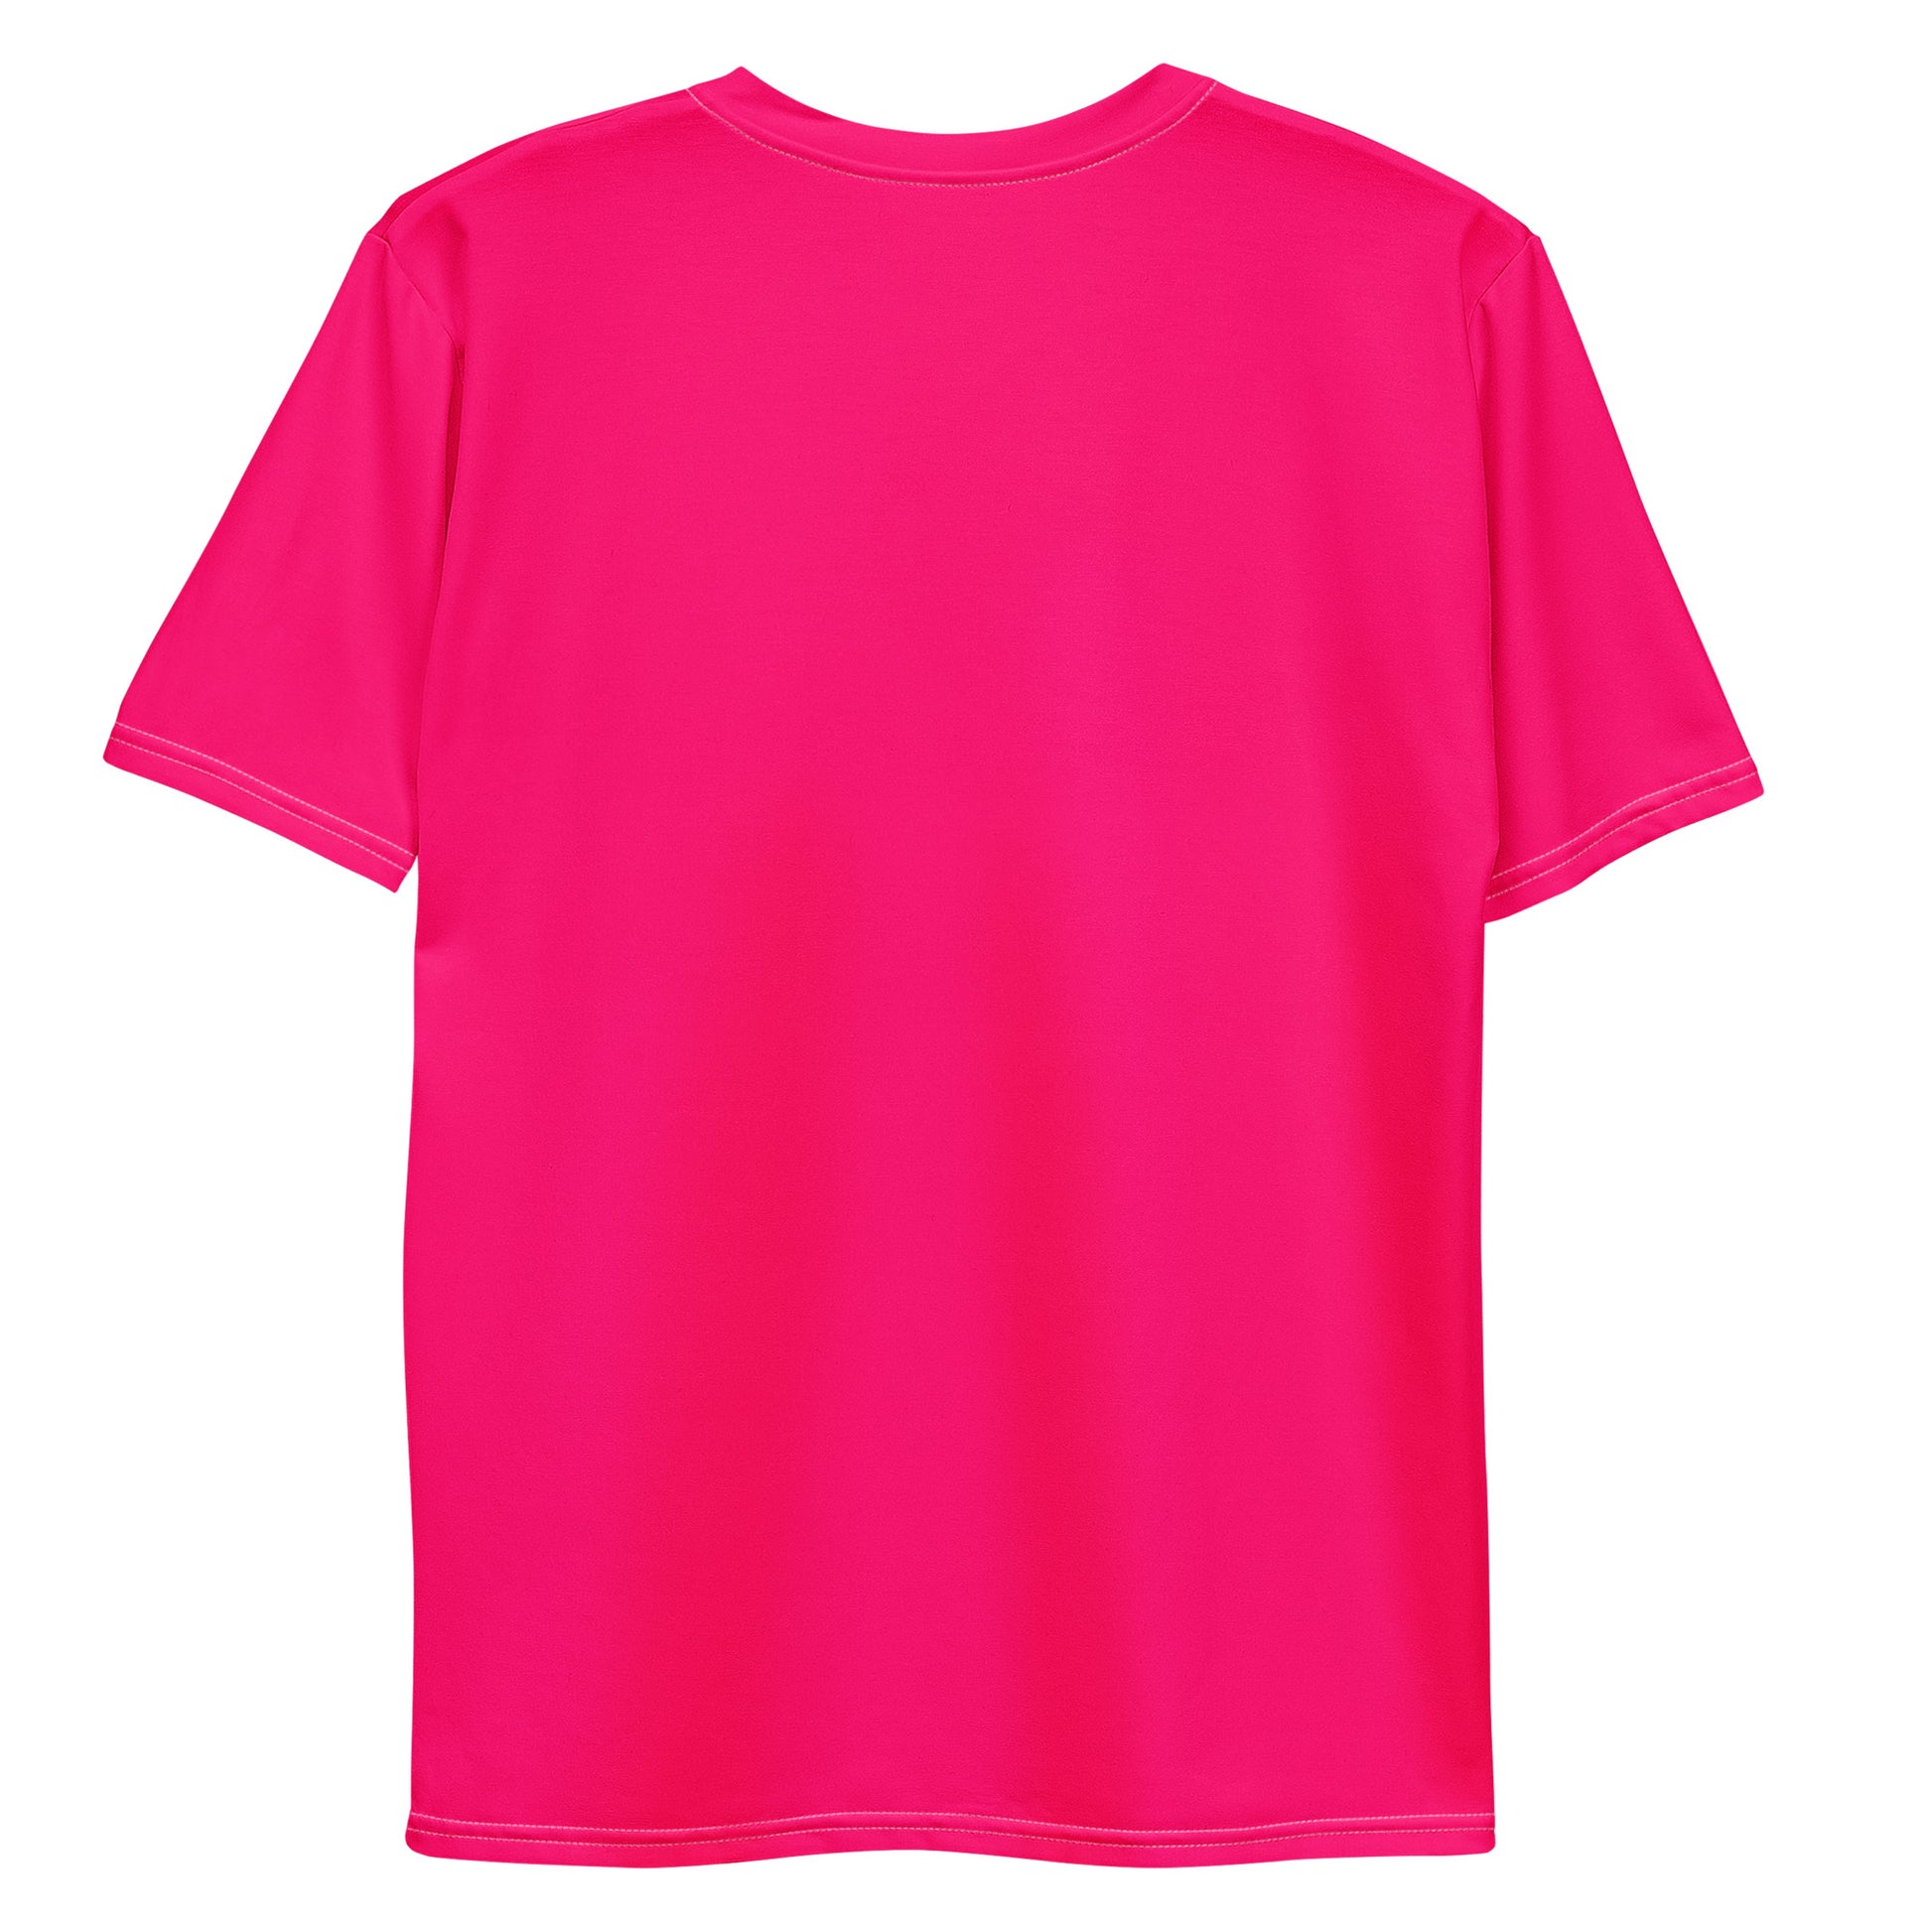 Primary Men's Athletic T-Shirt - Pink Punch 2XL / Pink Punch